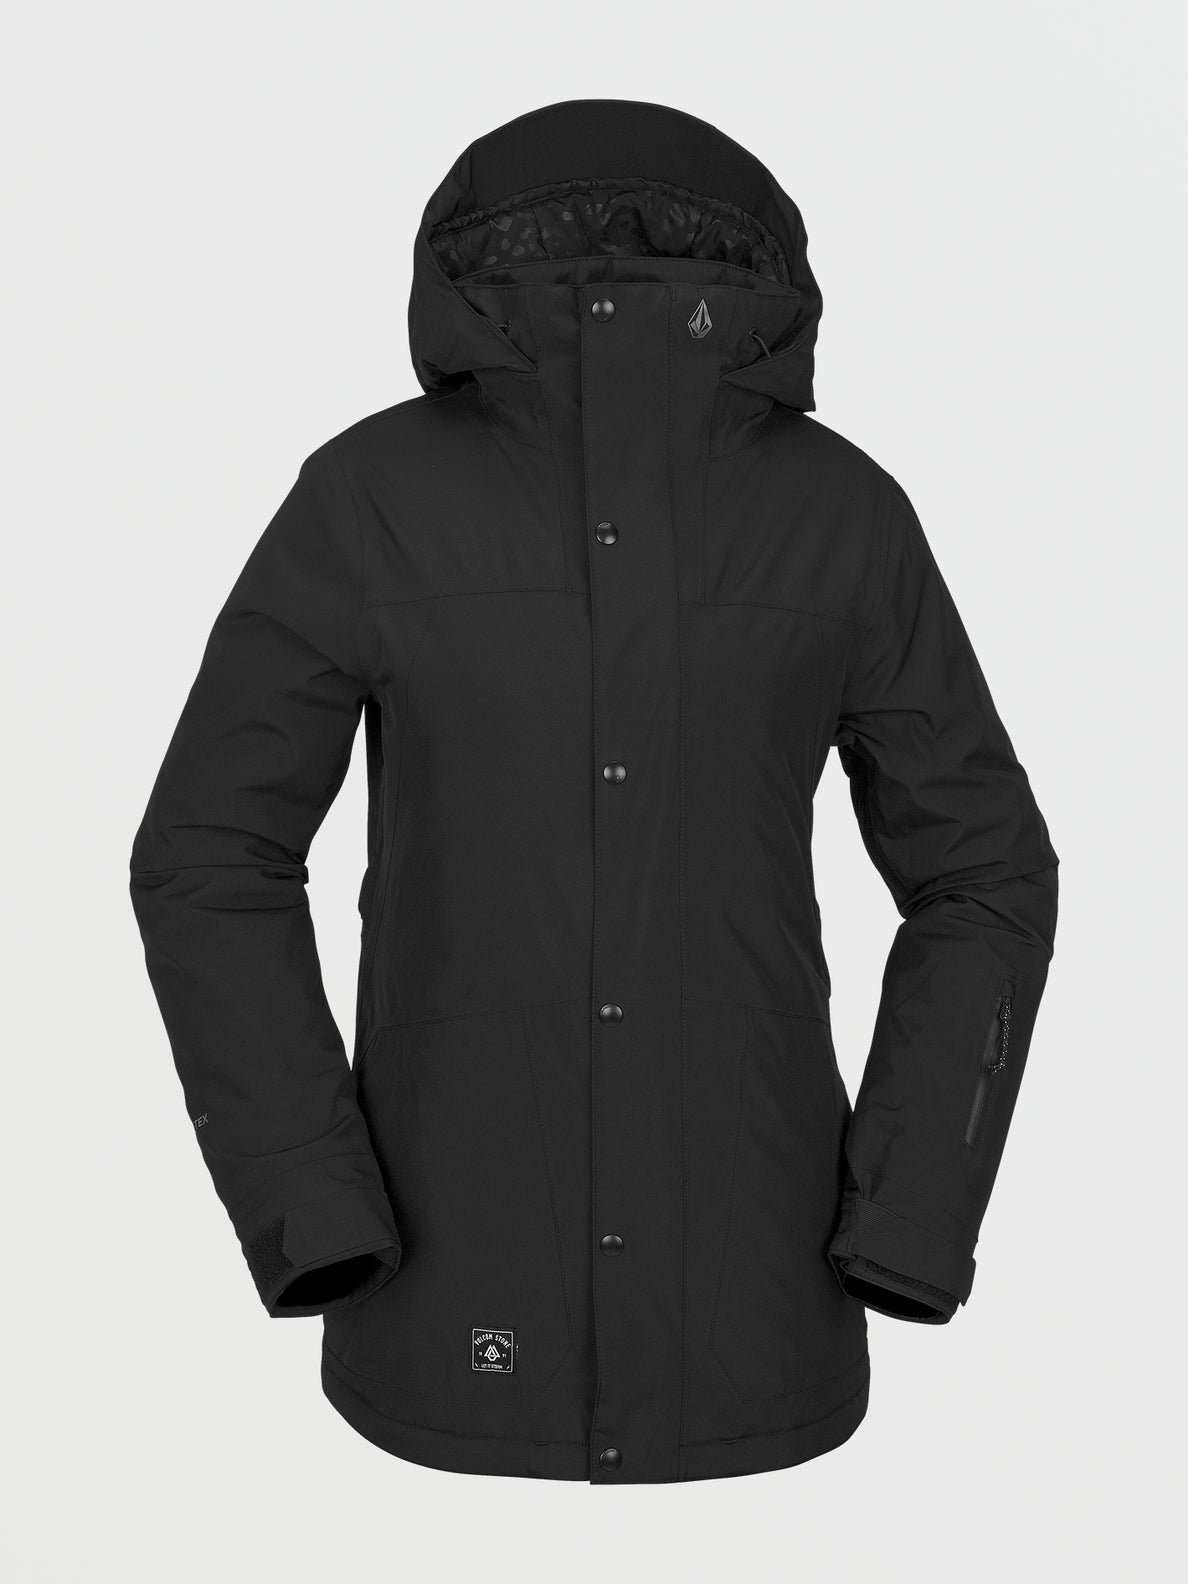 Women's Ell Insulated Gore-Tex Jacket